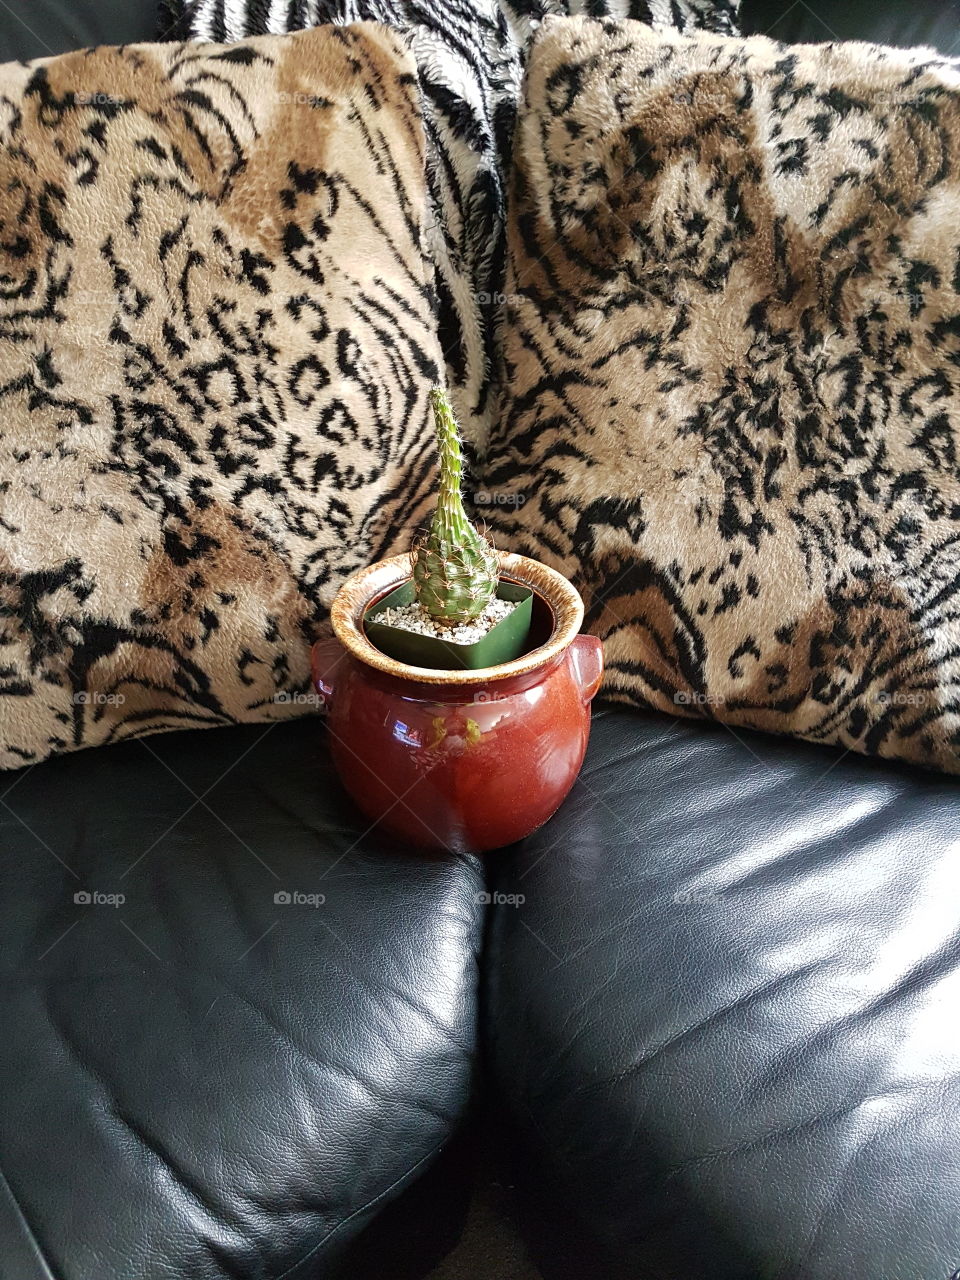 cactus on couch